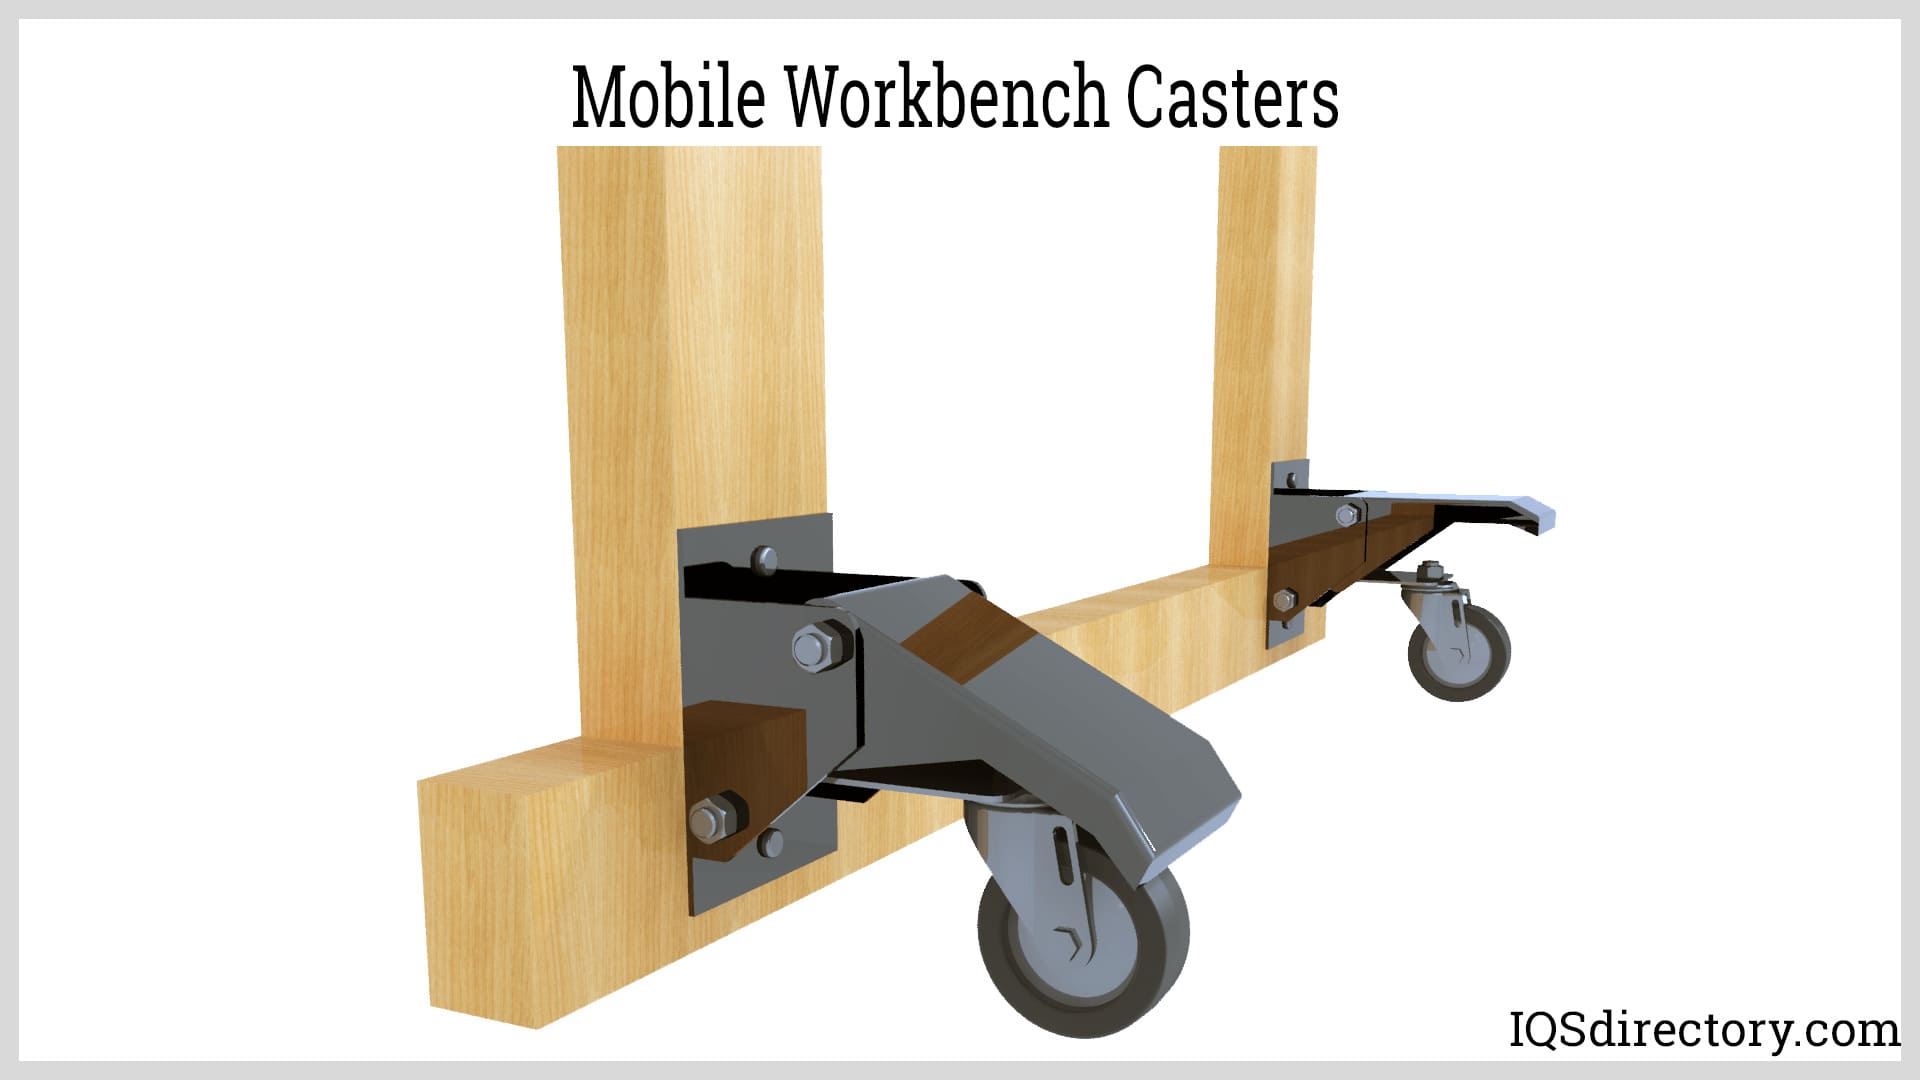 Mobile Workbench Casters